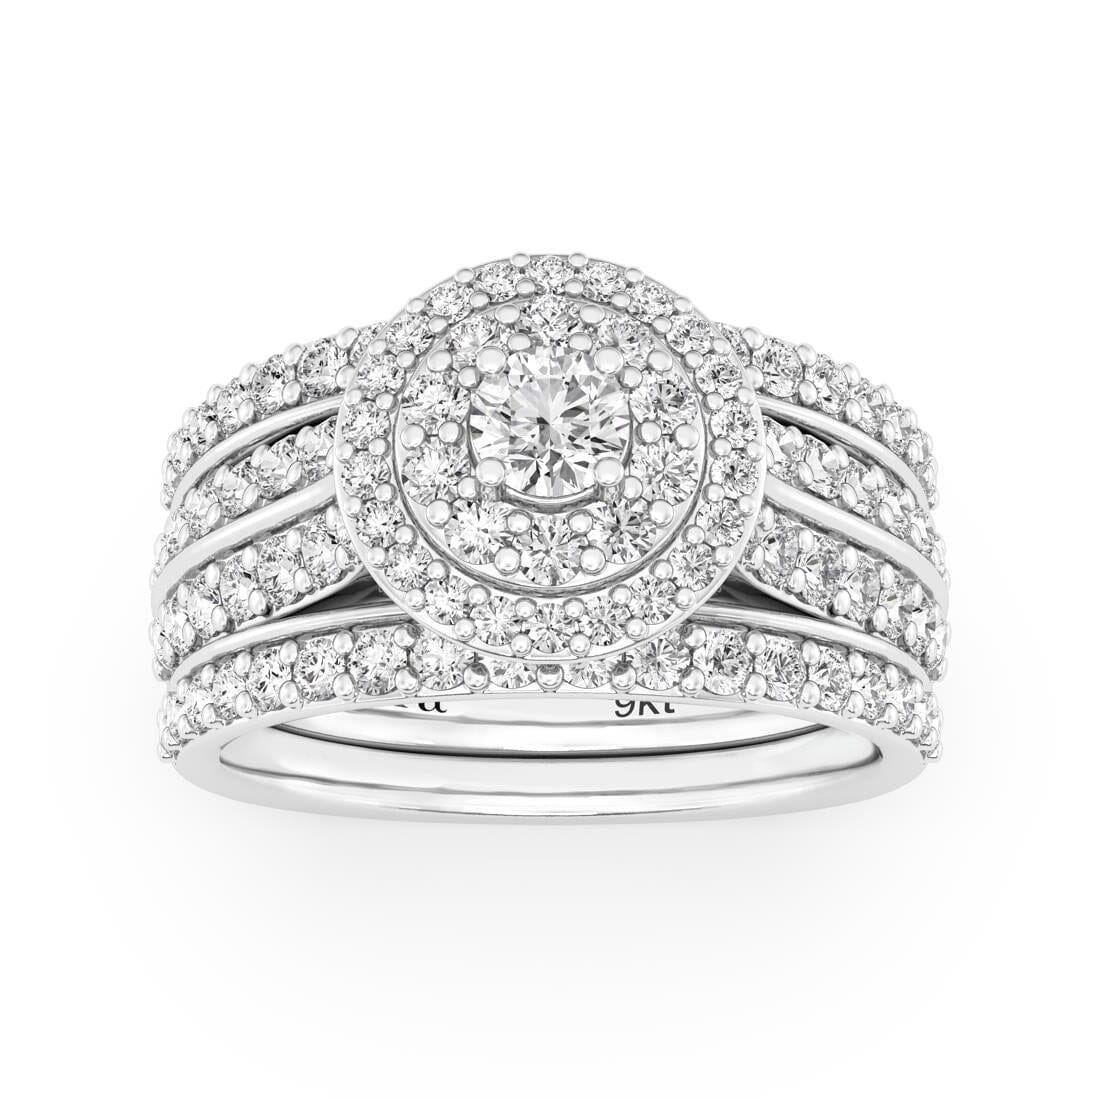 Meera Double Halo Ring with 1.50ct of Laboratory Grown Diamonds in 9ct White Gold Rings Bevilles 